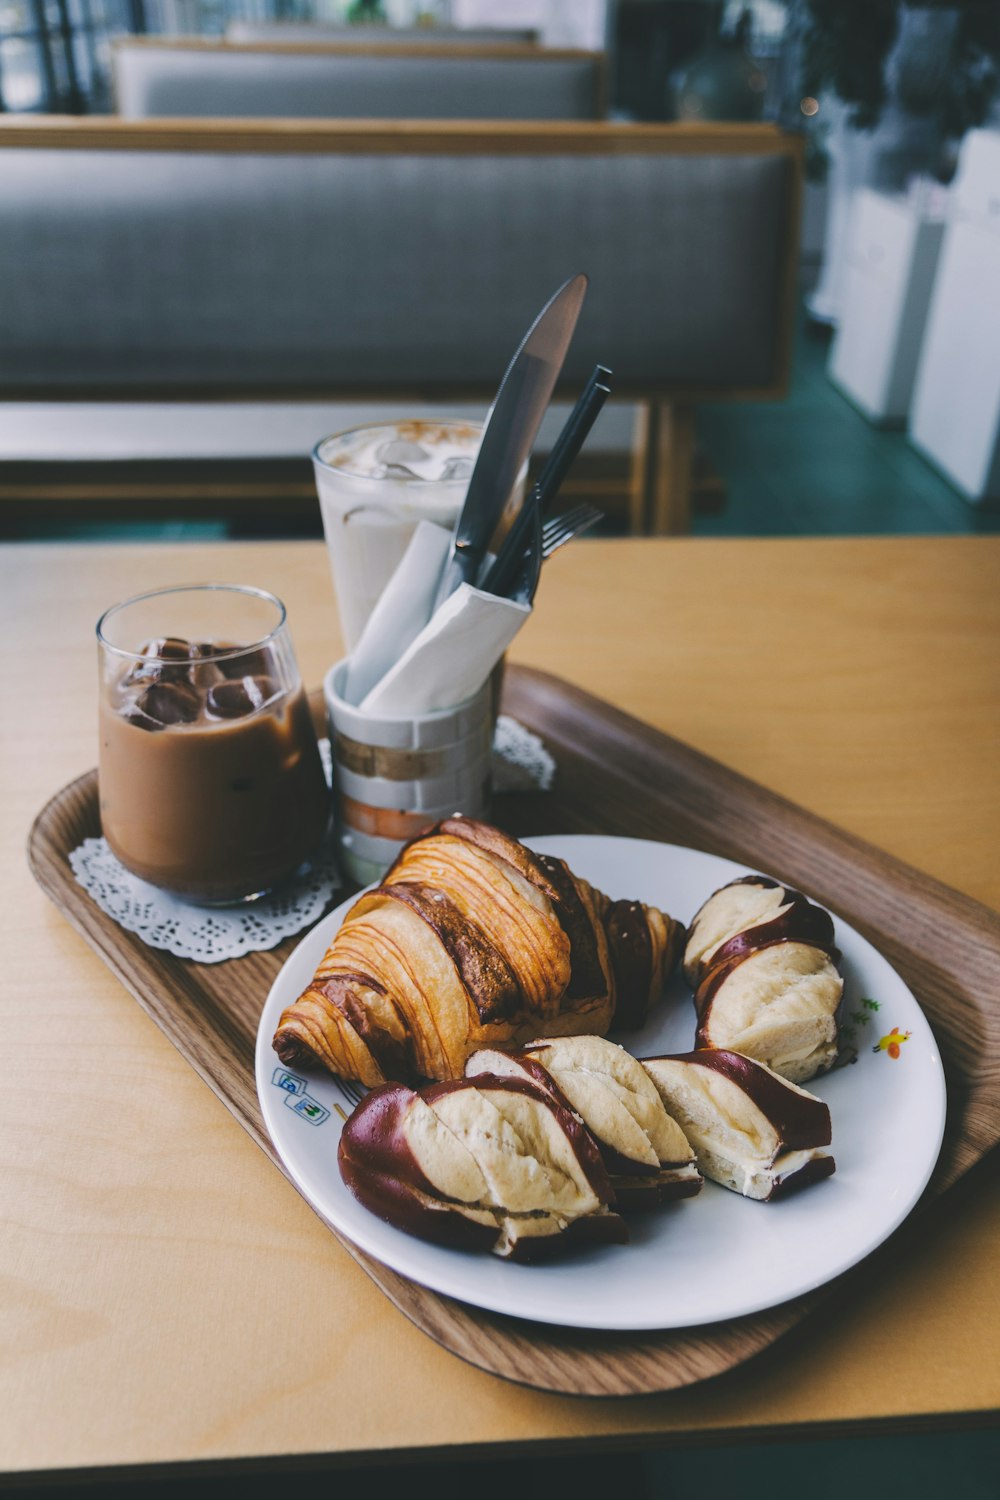 croissant on plate near ice cold drinks in cup beside gray stainless steel knife on brown tray